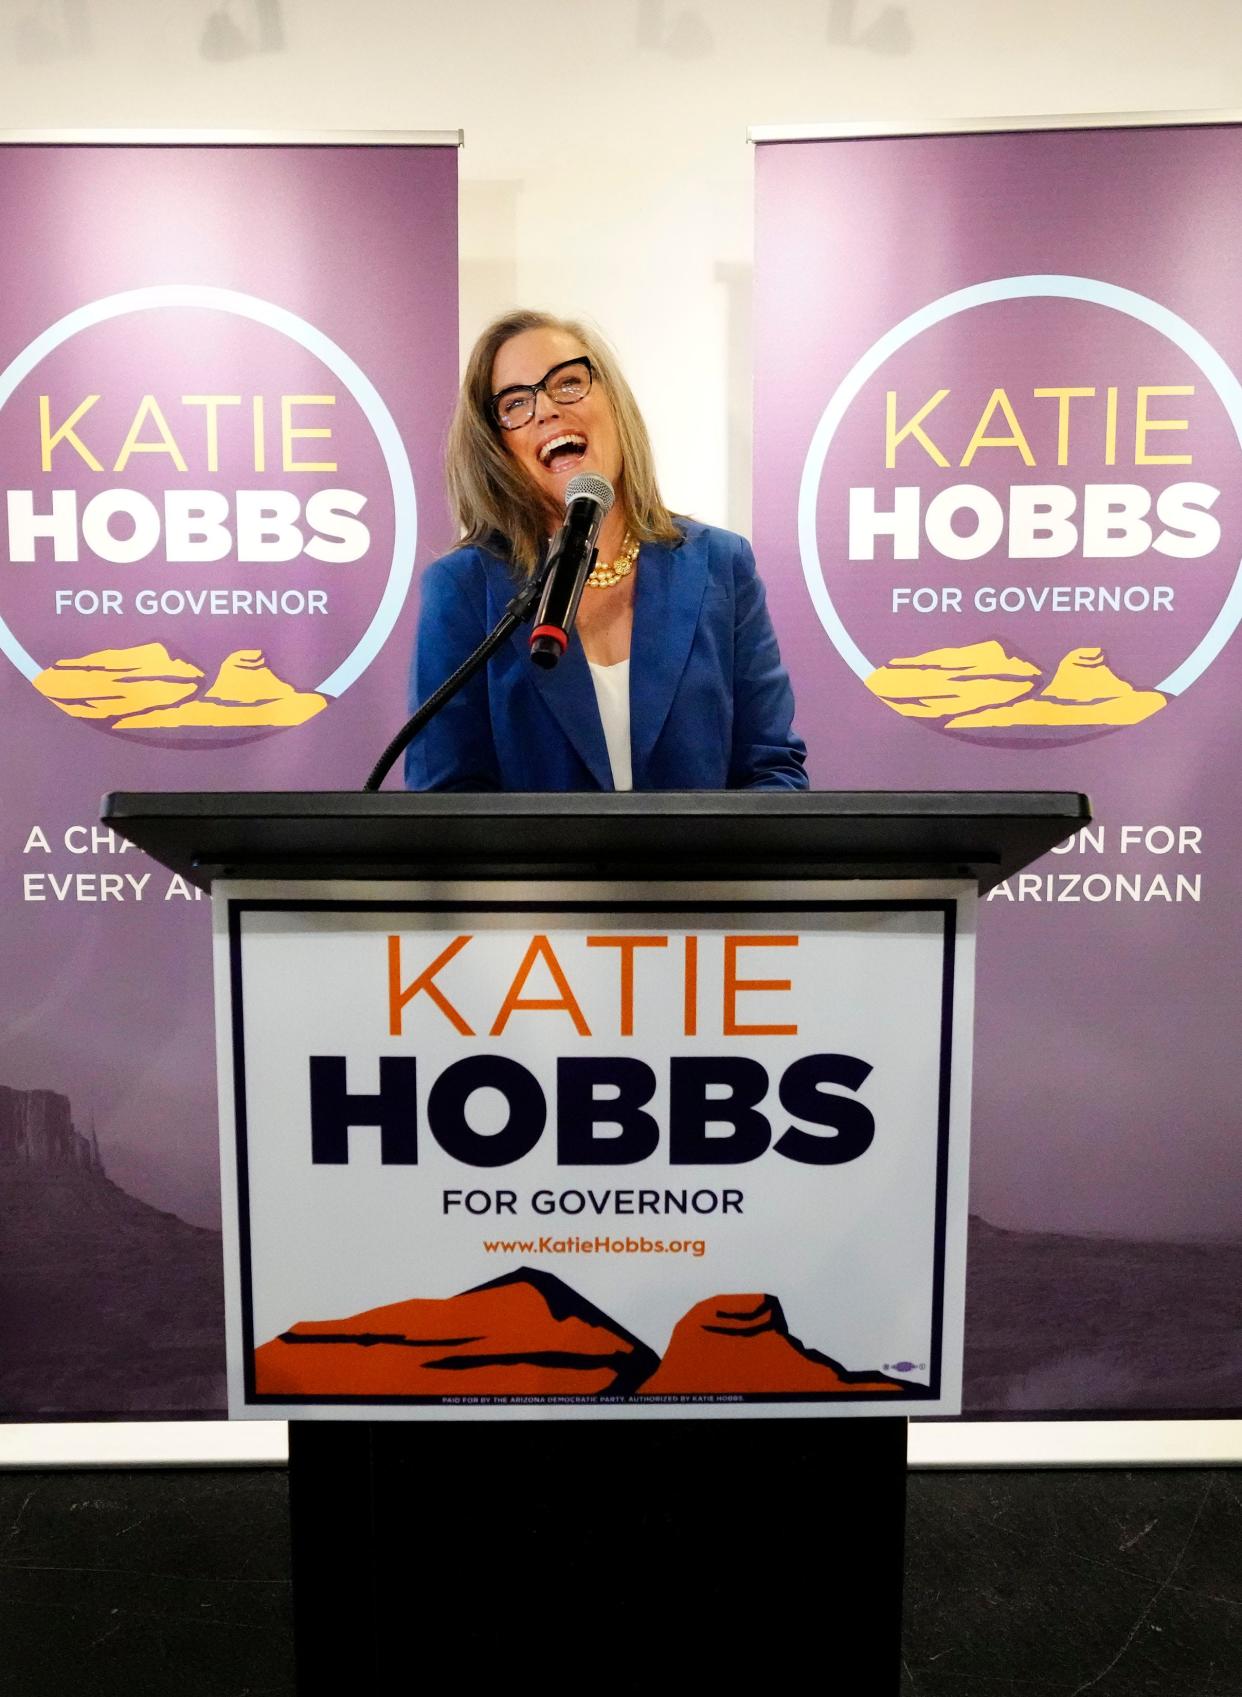 Katie Hobbs, Democratic candidate for Arizona governor, declares victory in her race at a news conference in Phoenix on Nov. 15, 2022. Hobbs defeated Republican candidate Kari Lake.